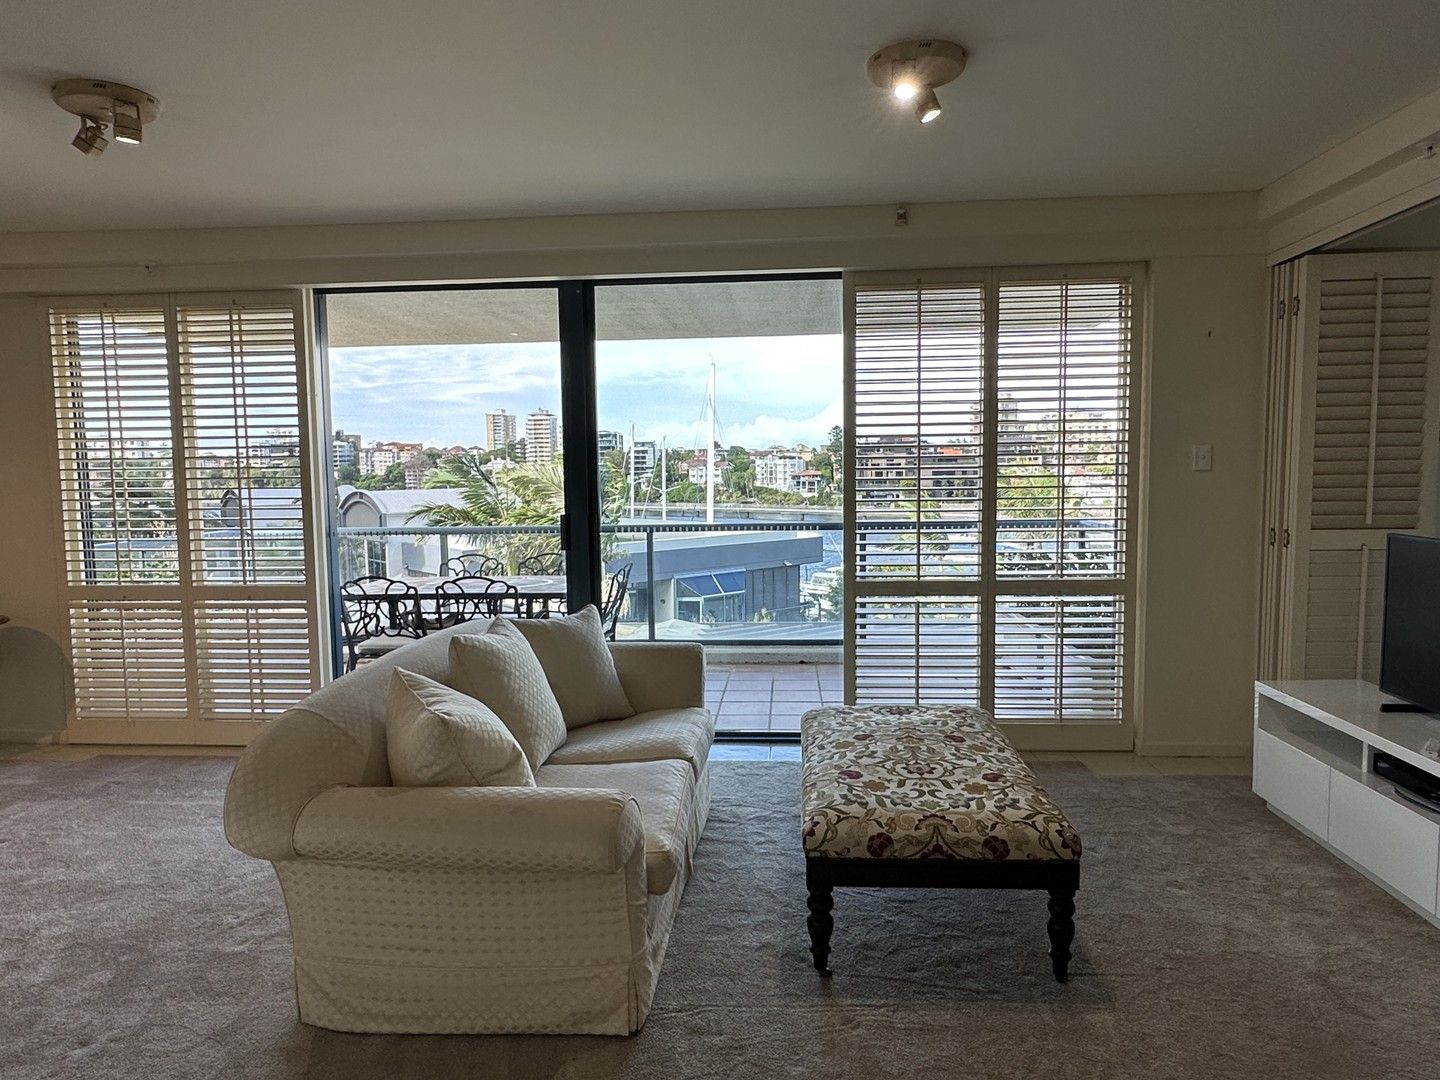 2 bedrooms Apartment / Unit / Flat in 14/42 Ferry Street KANGAROO POINT QLD, 4169